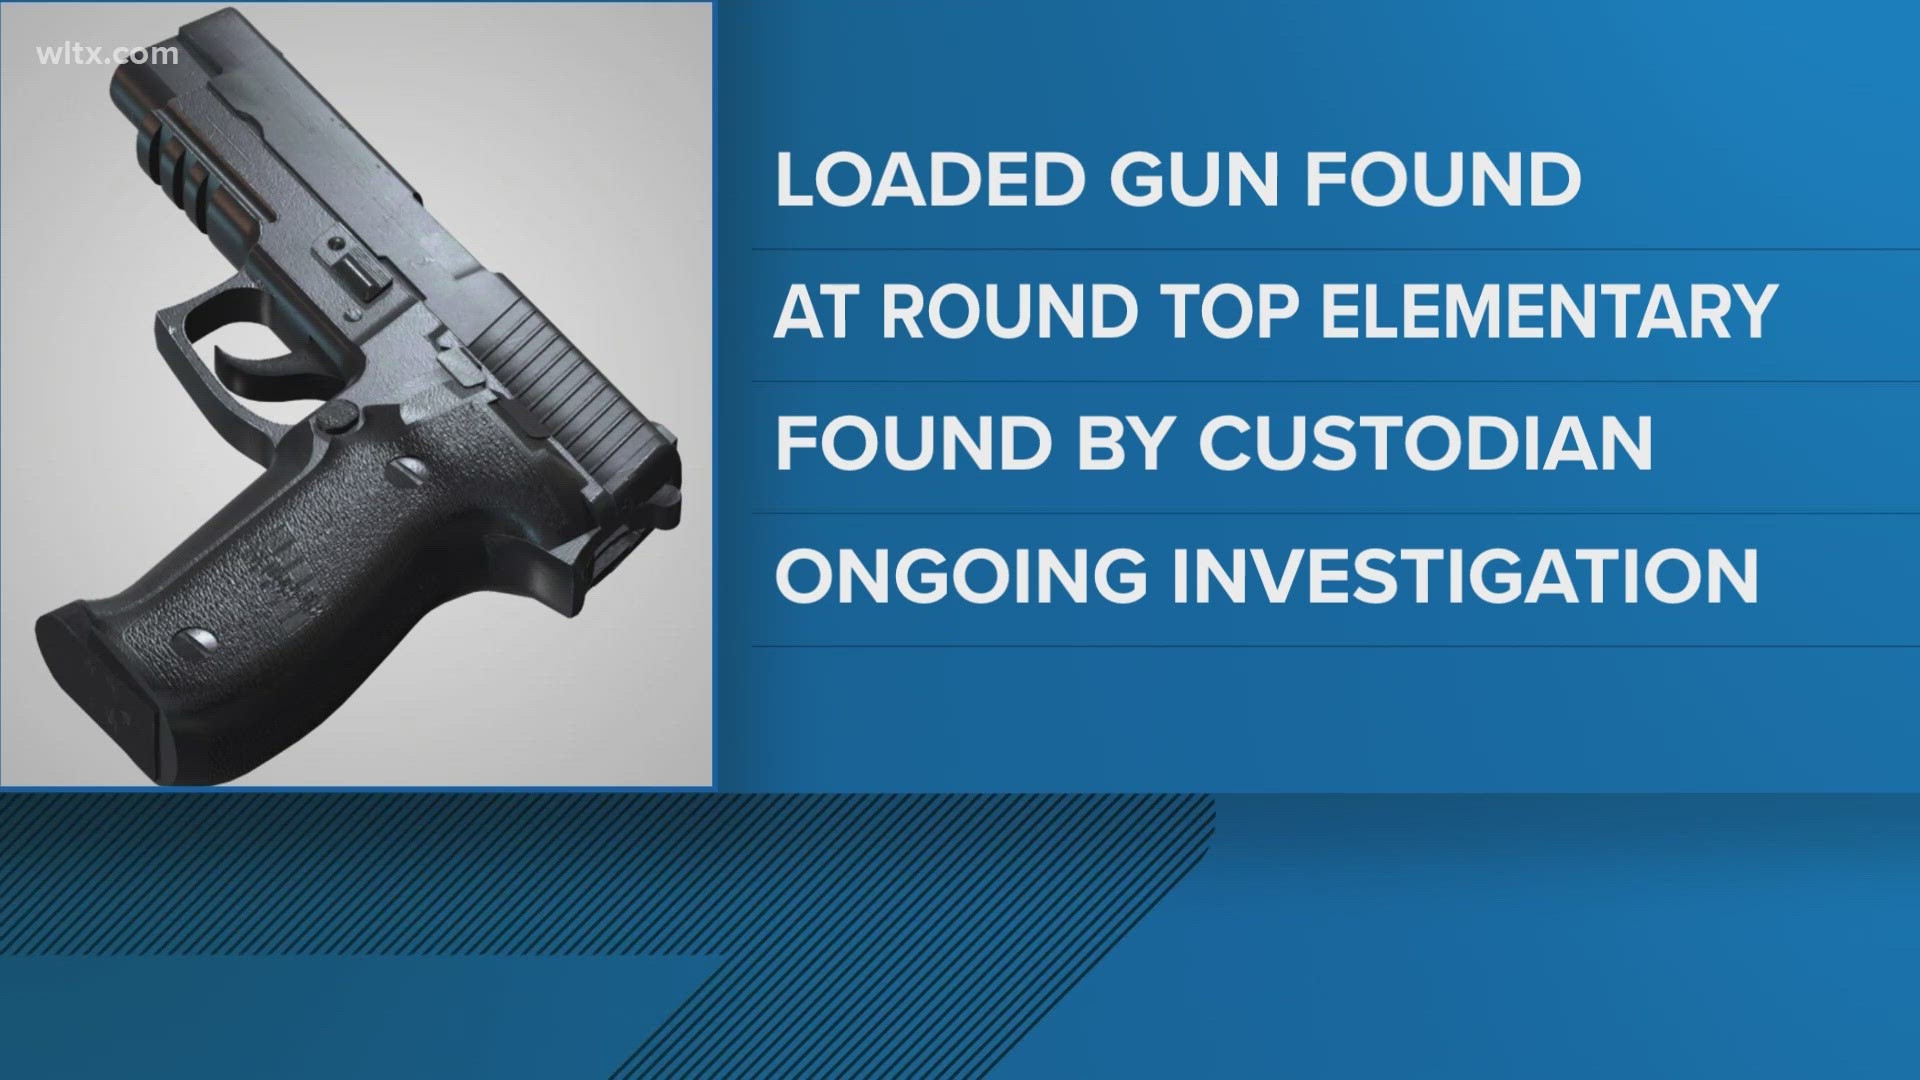 The gun was found after hours by the Round Top elementary school's custodian.